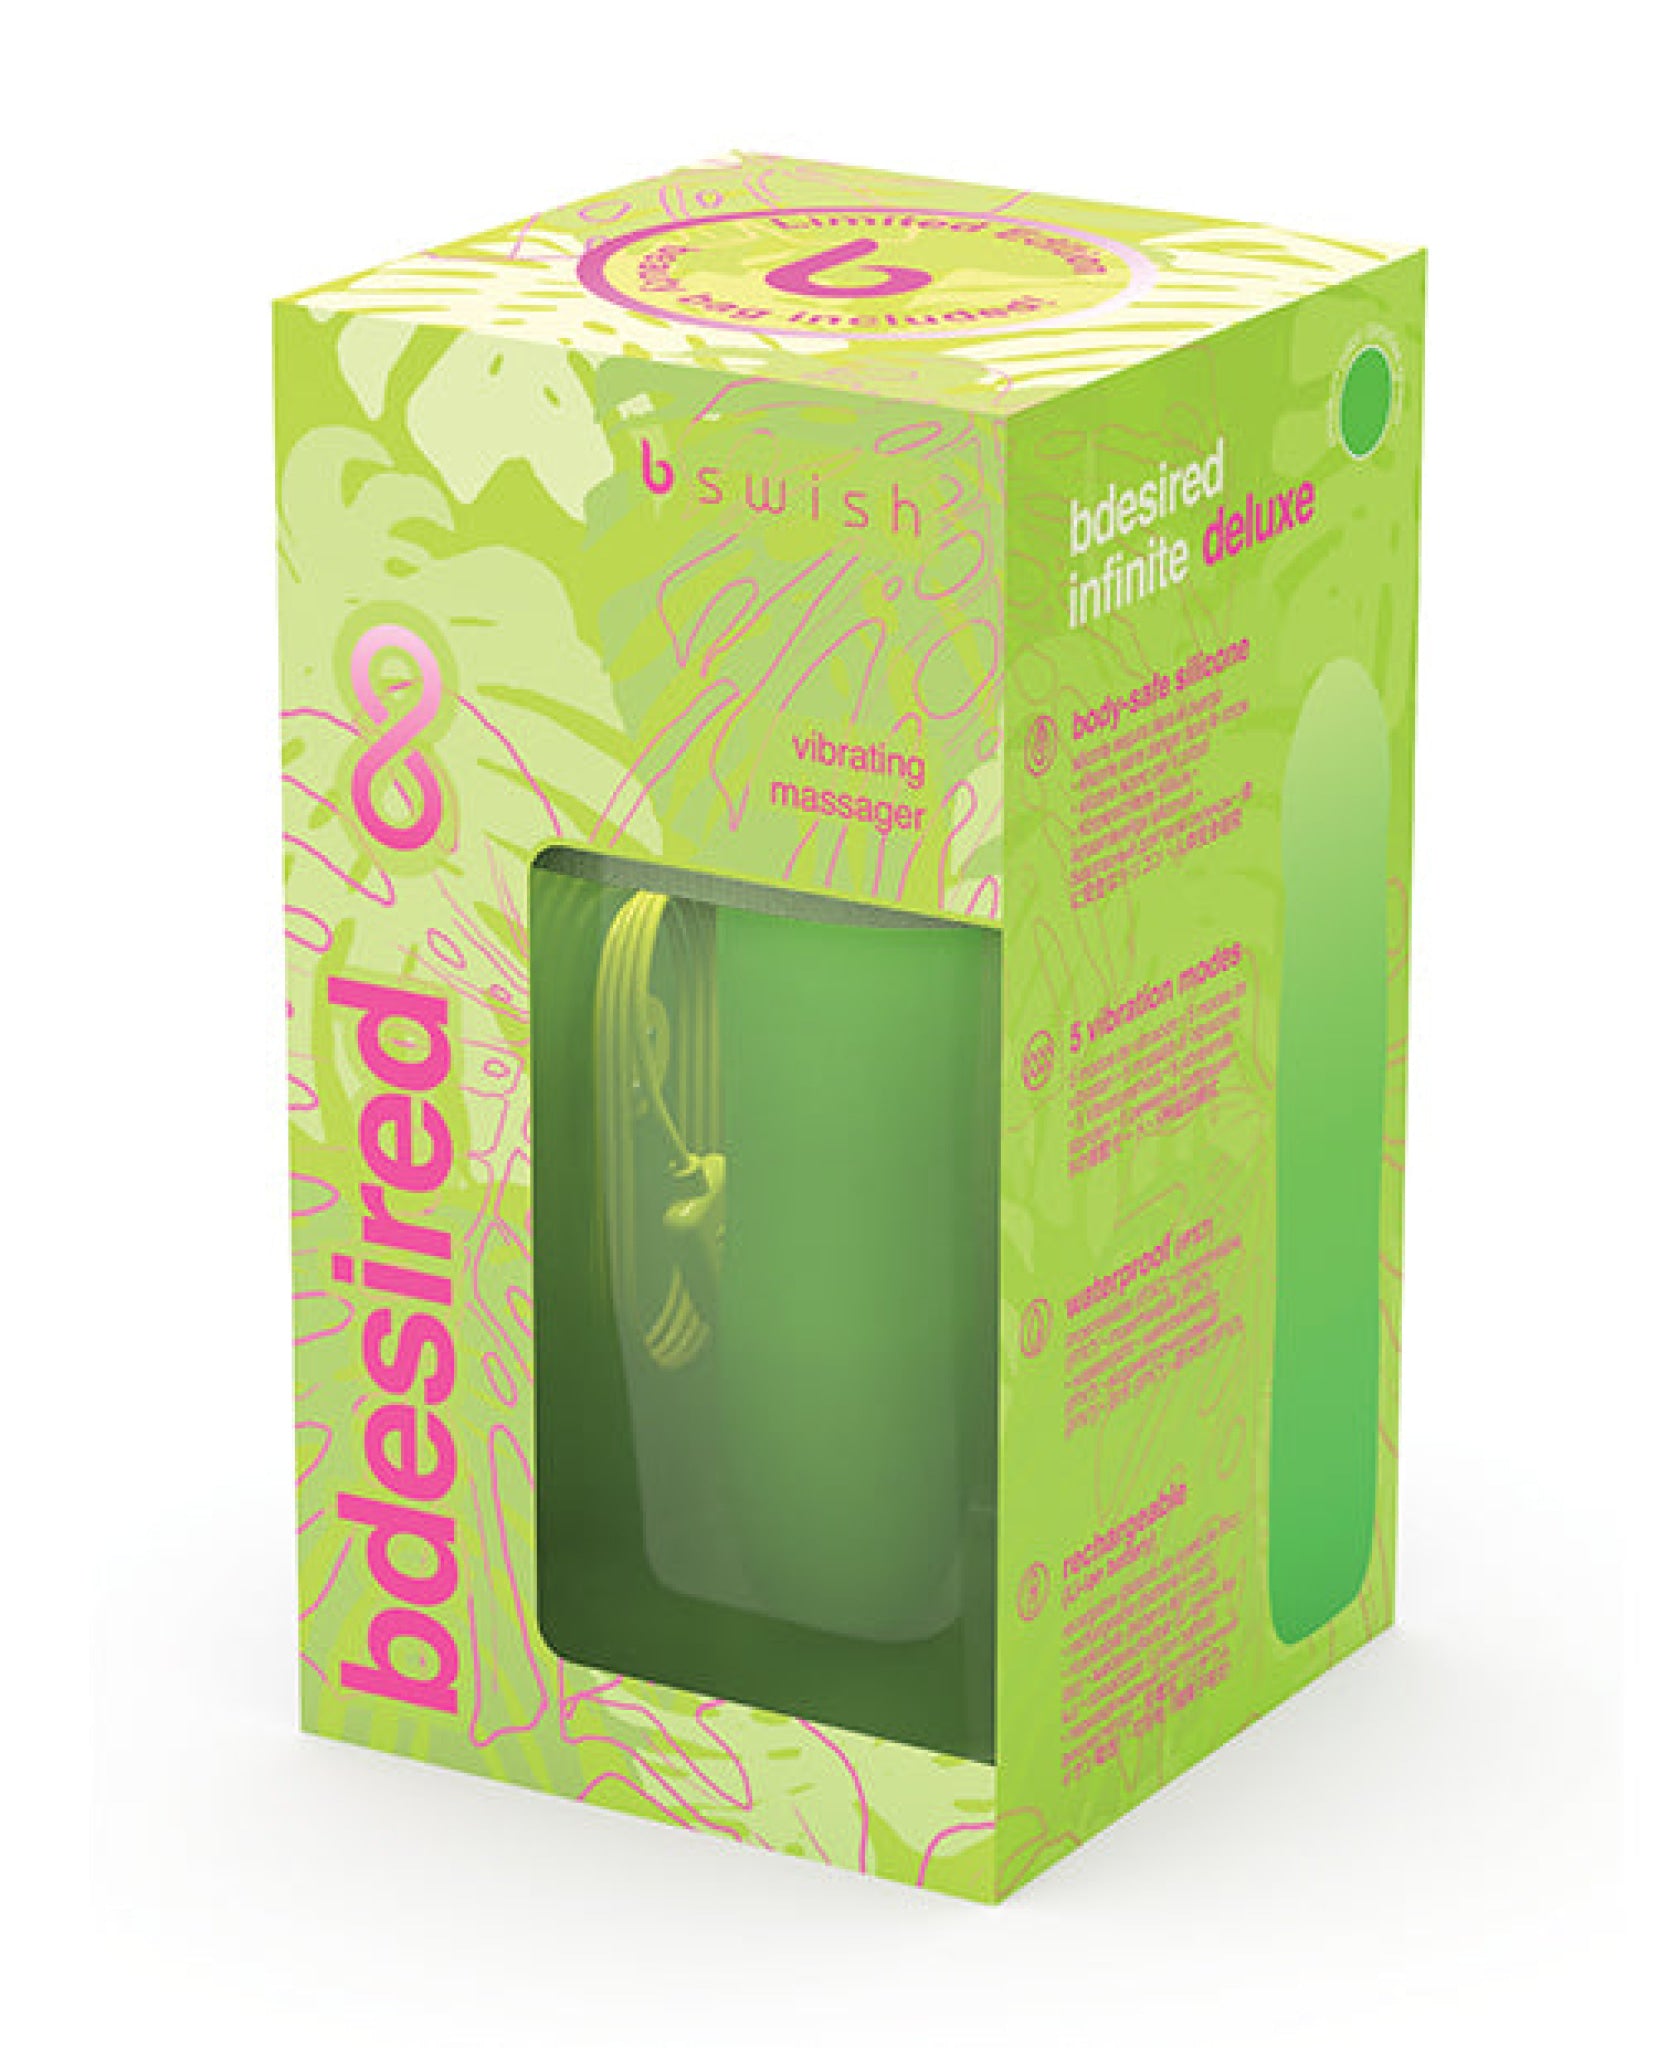 Bdesired Infinite Deluxe LE Paradise Vibrator - Green Bswish